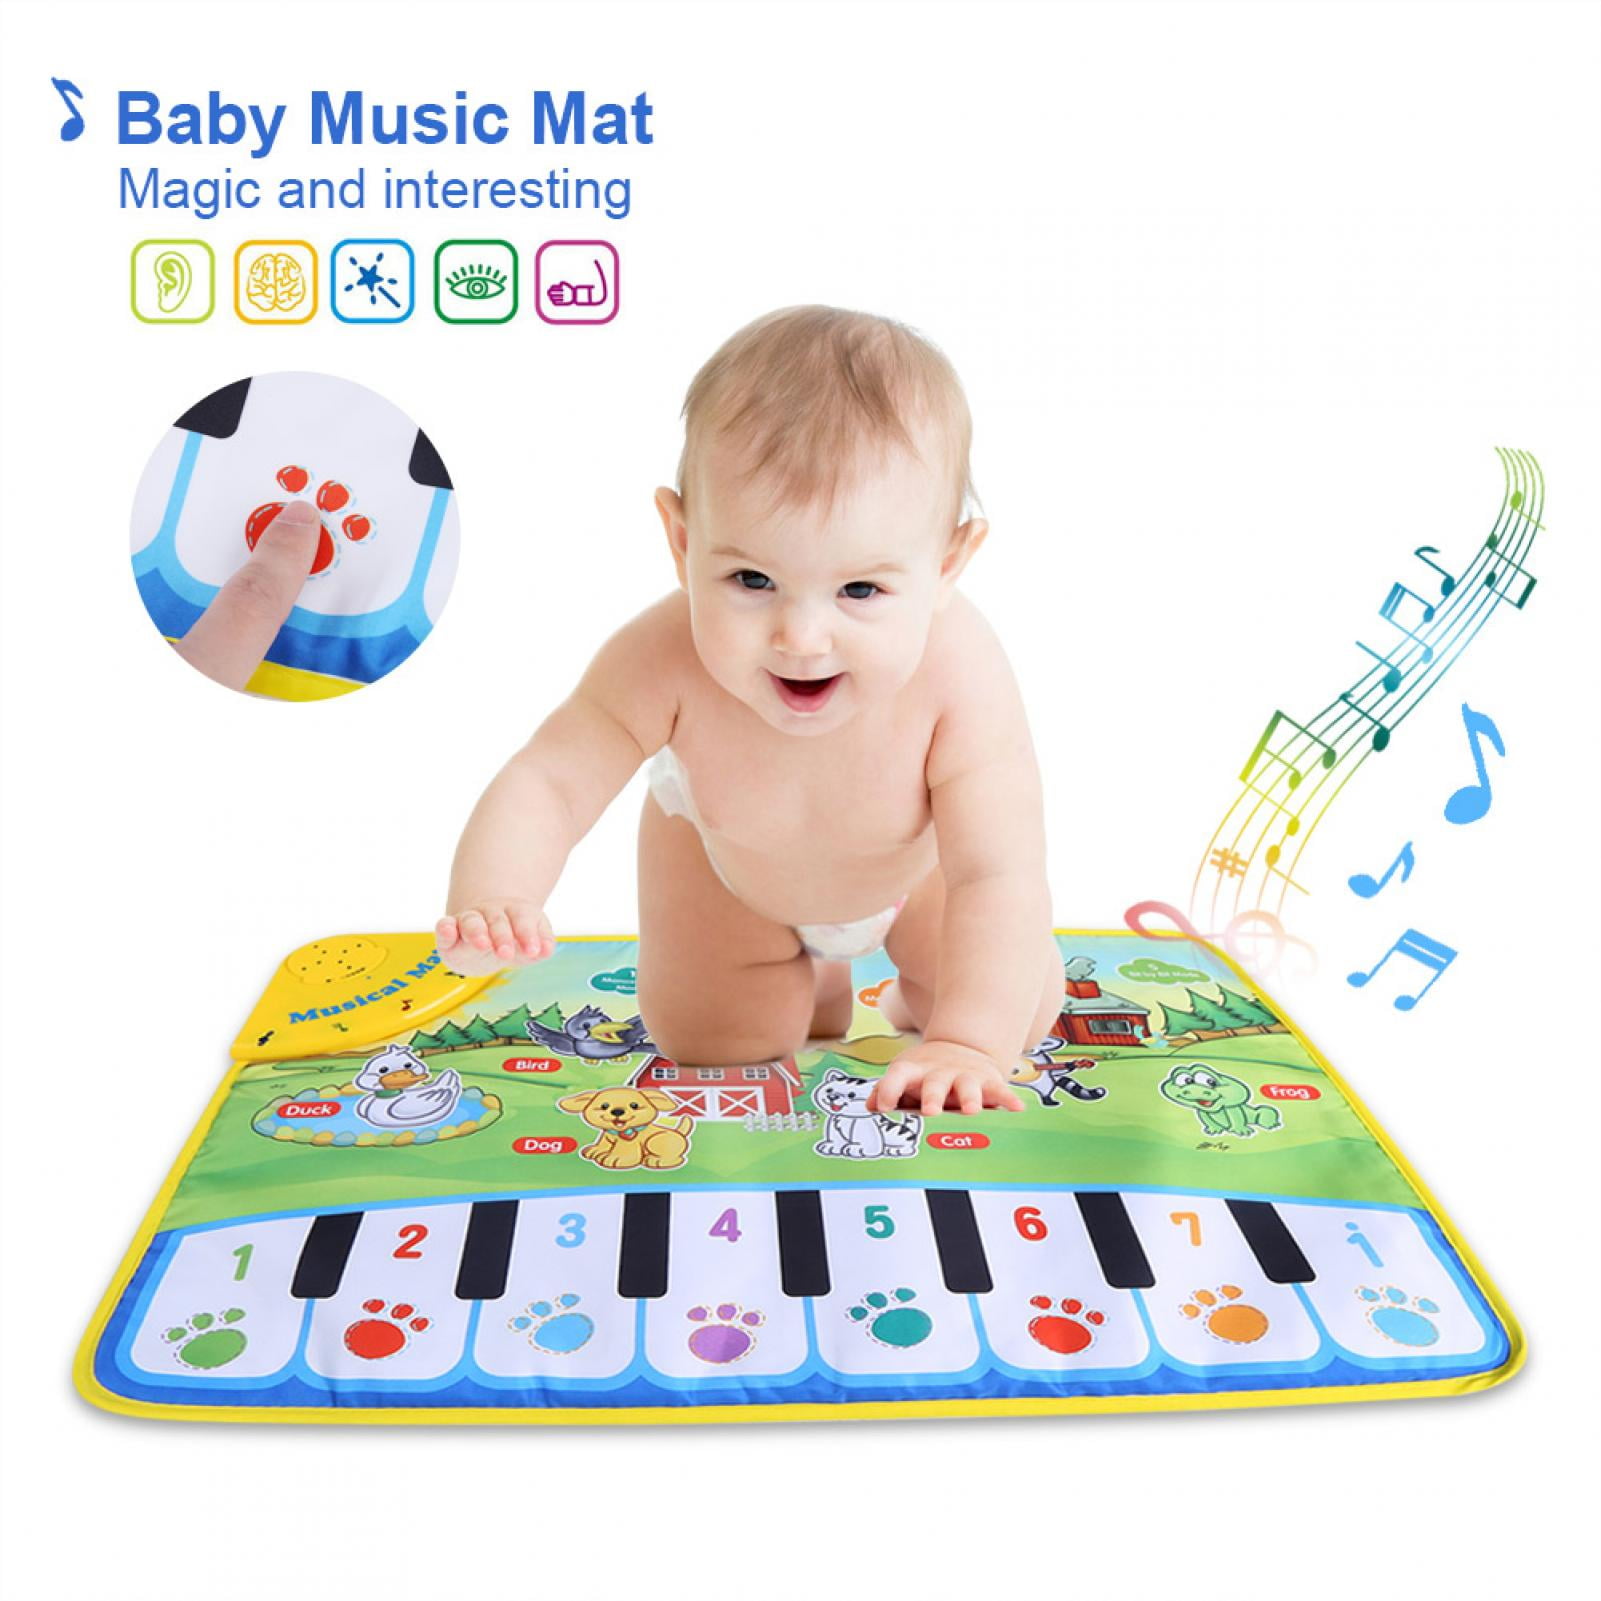 Ynanimery Piano Mat Baby Piano Musical Mat Keyboard Dance Floor Mat with Recording & Music & Animal Sound,Multifunctional Early Education Toys for Baby Girls Boys Piano Mat 01 